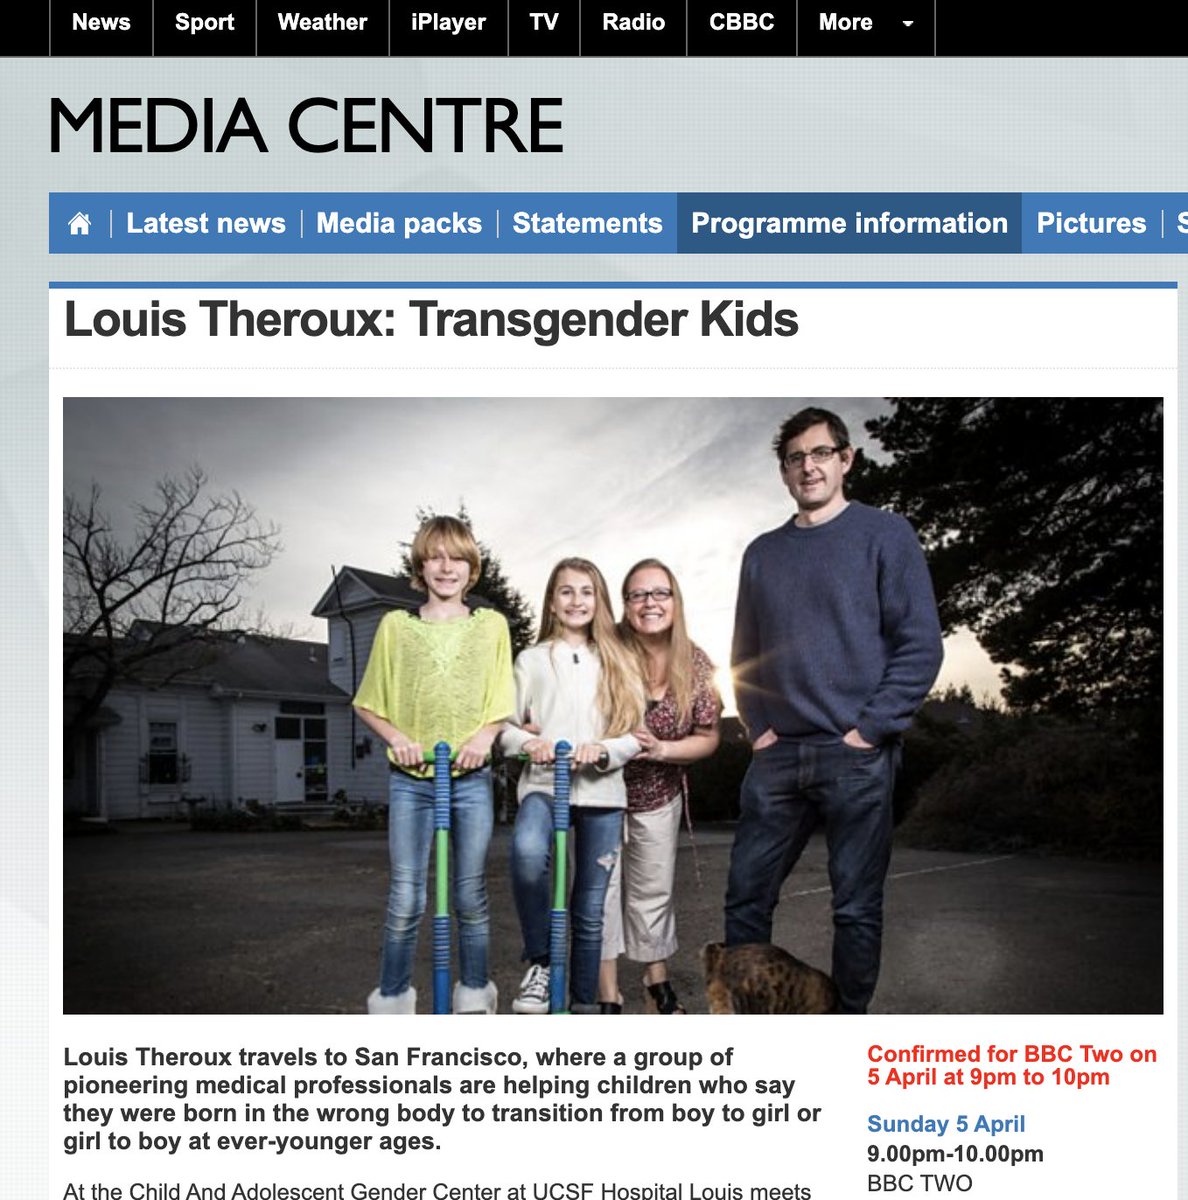 Louis Theroux, on the BBC https://www.bbc.co.uk/mediacentre/proginfo/2015/14/louis-theroux-transgender-kids